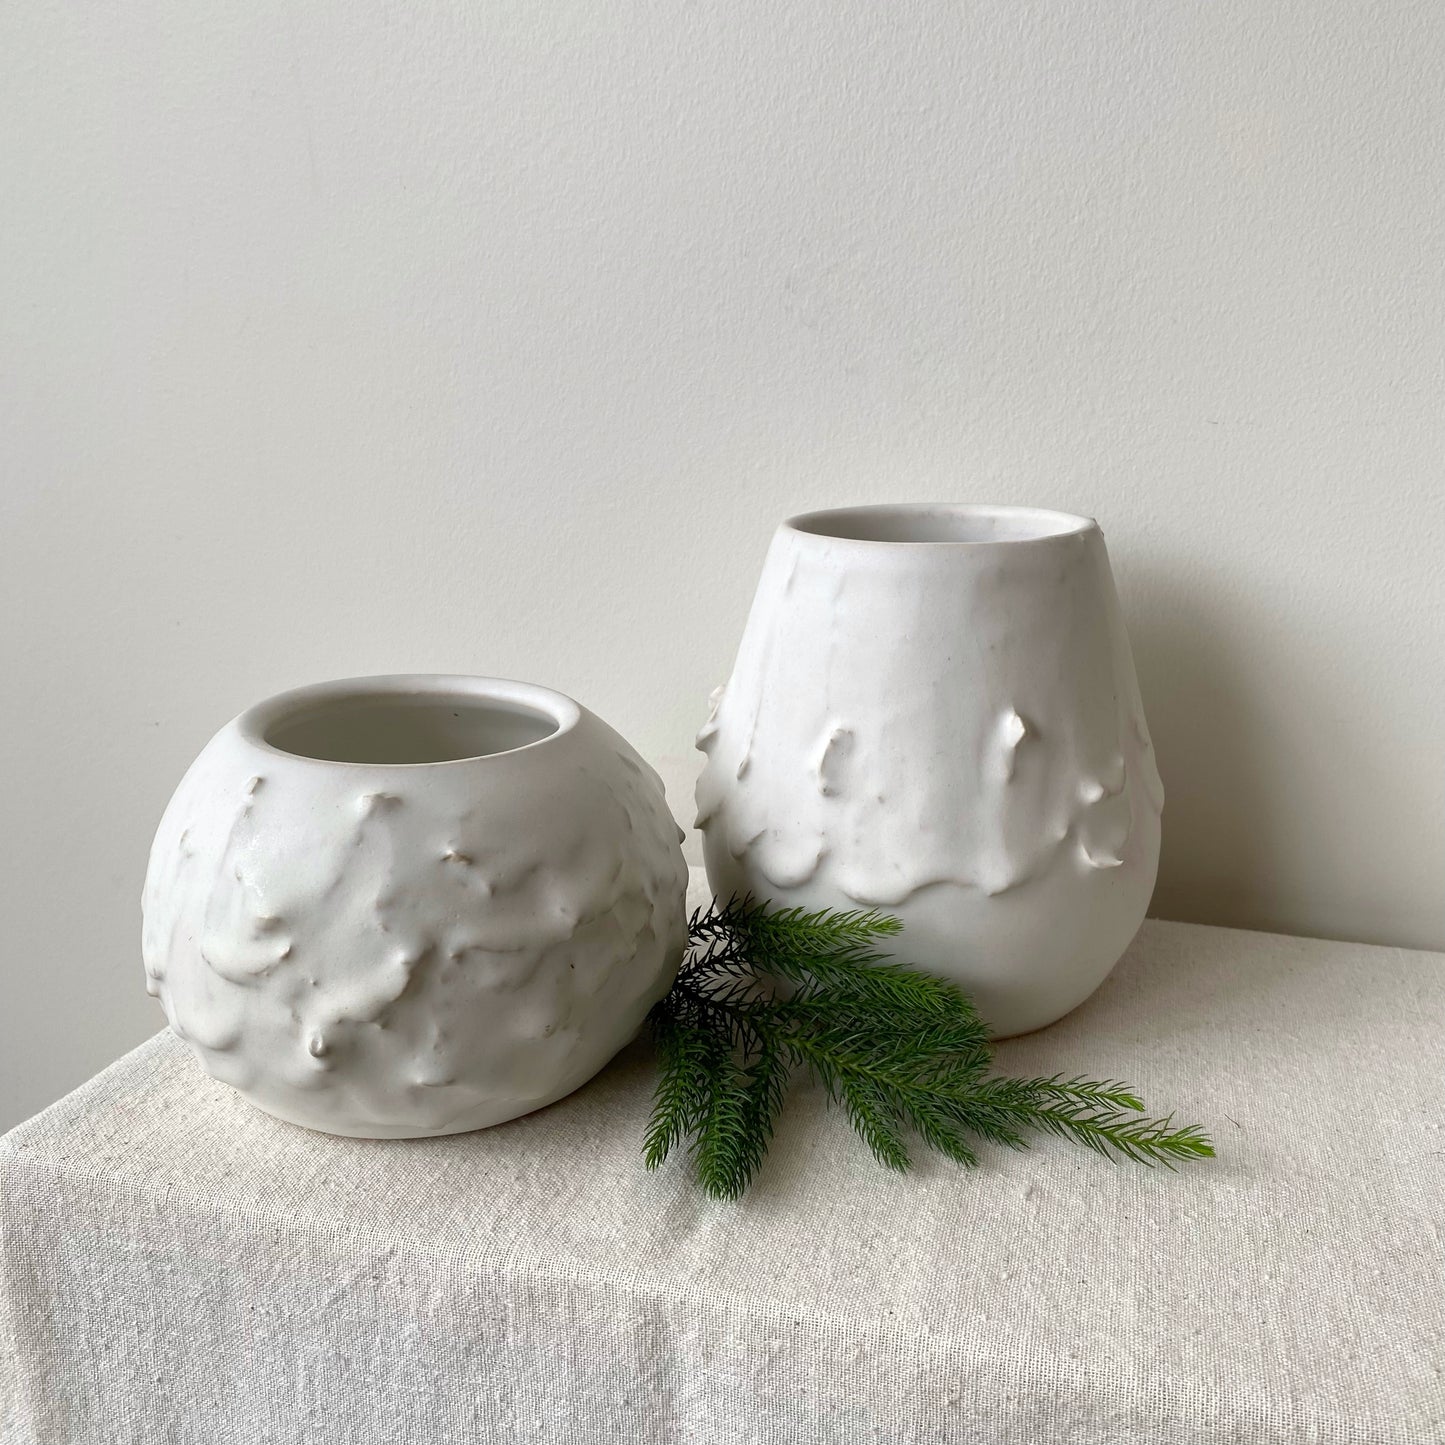 Pottery Vases by Catrin Magnusson, Choose